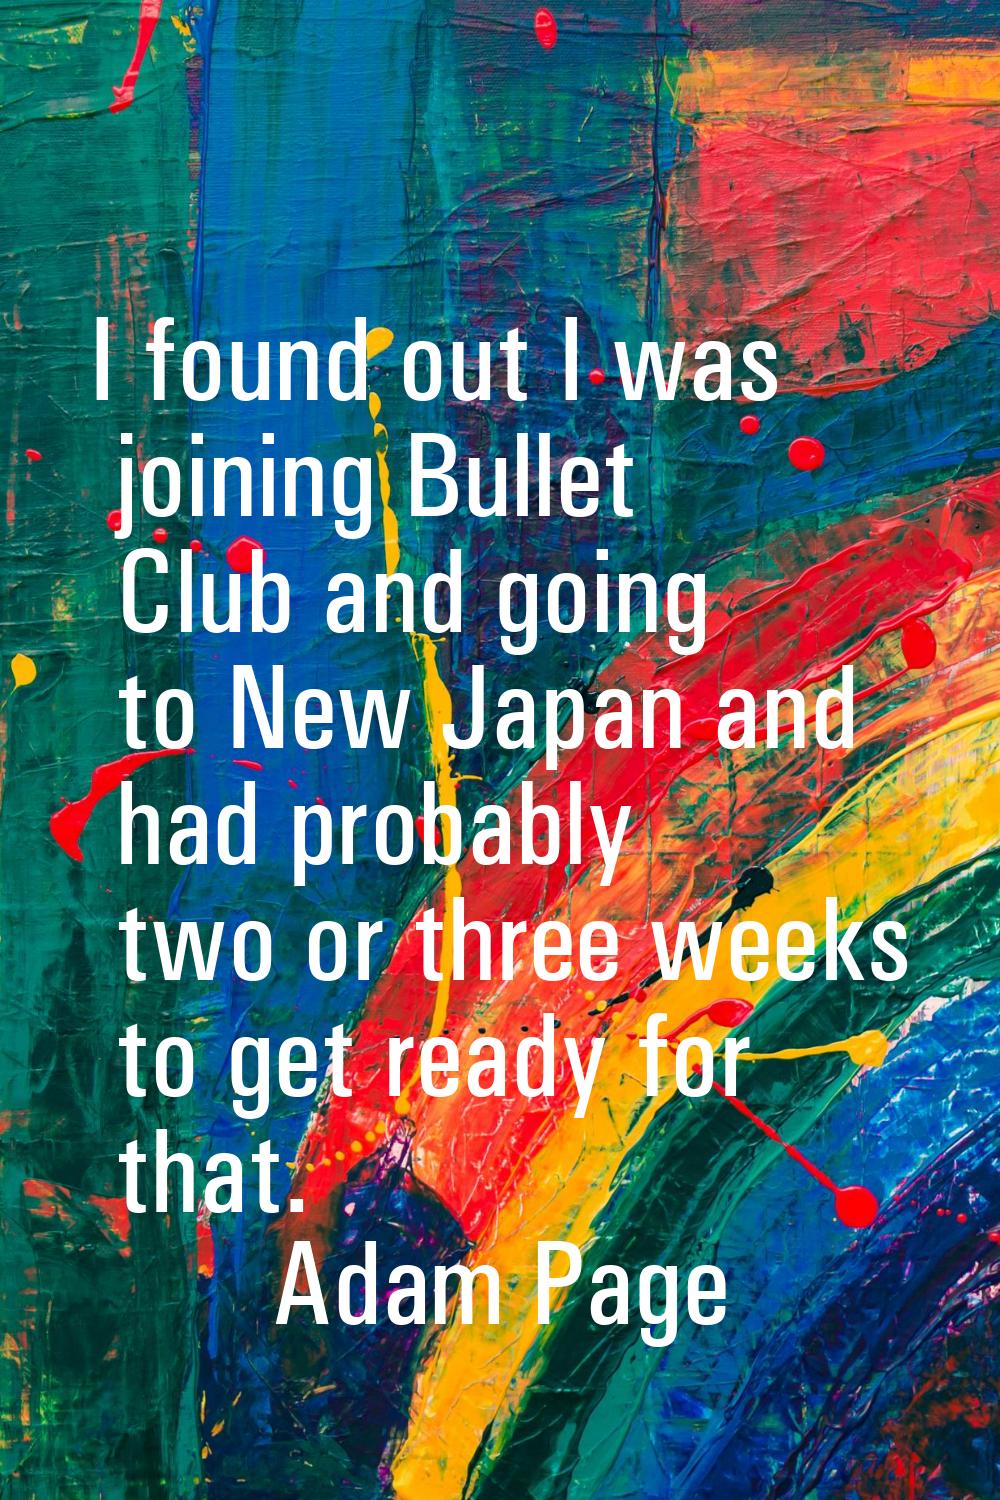 I found out I was joining Bullet Club and going to New Japan and had probably two or three weeks to